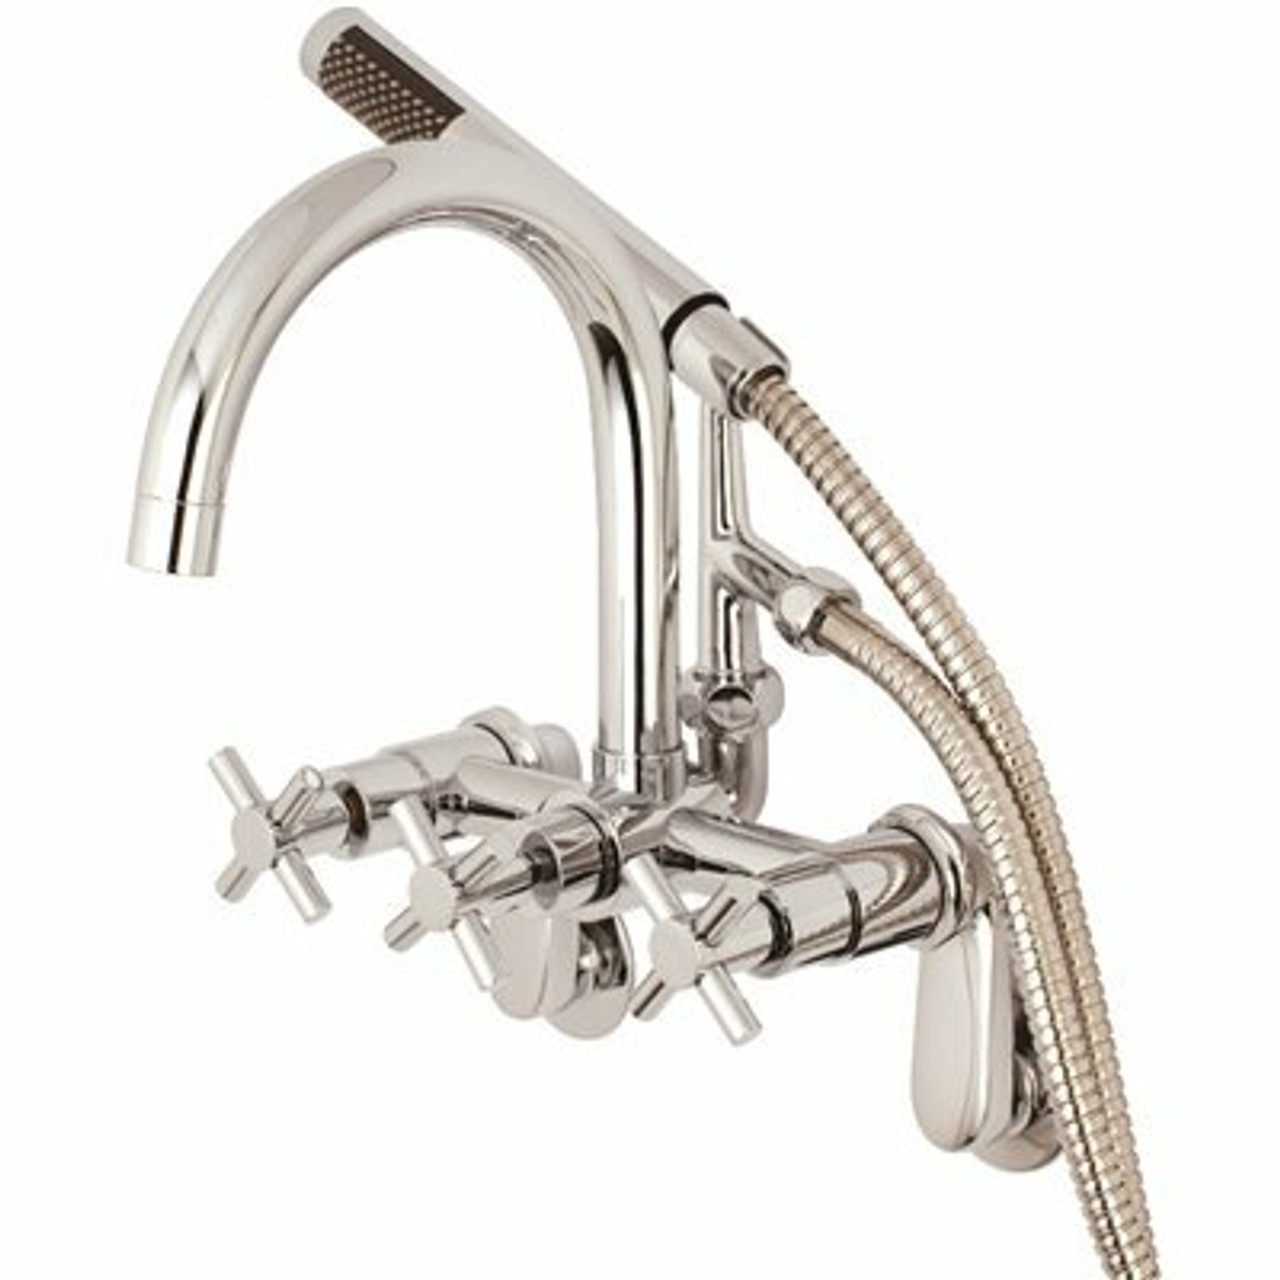 Kingston Brass Modern Adjustable 3-Handle Wall-Mount Claw Foot Tub Faucet With Handshower In Chrome